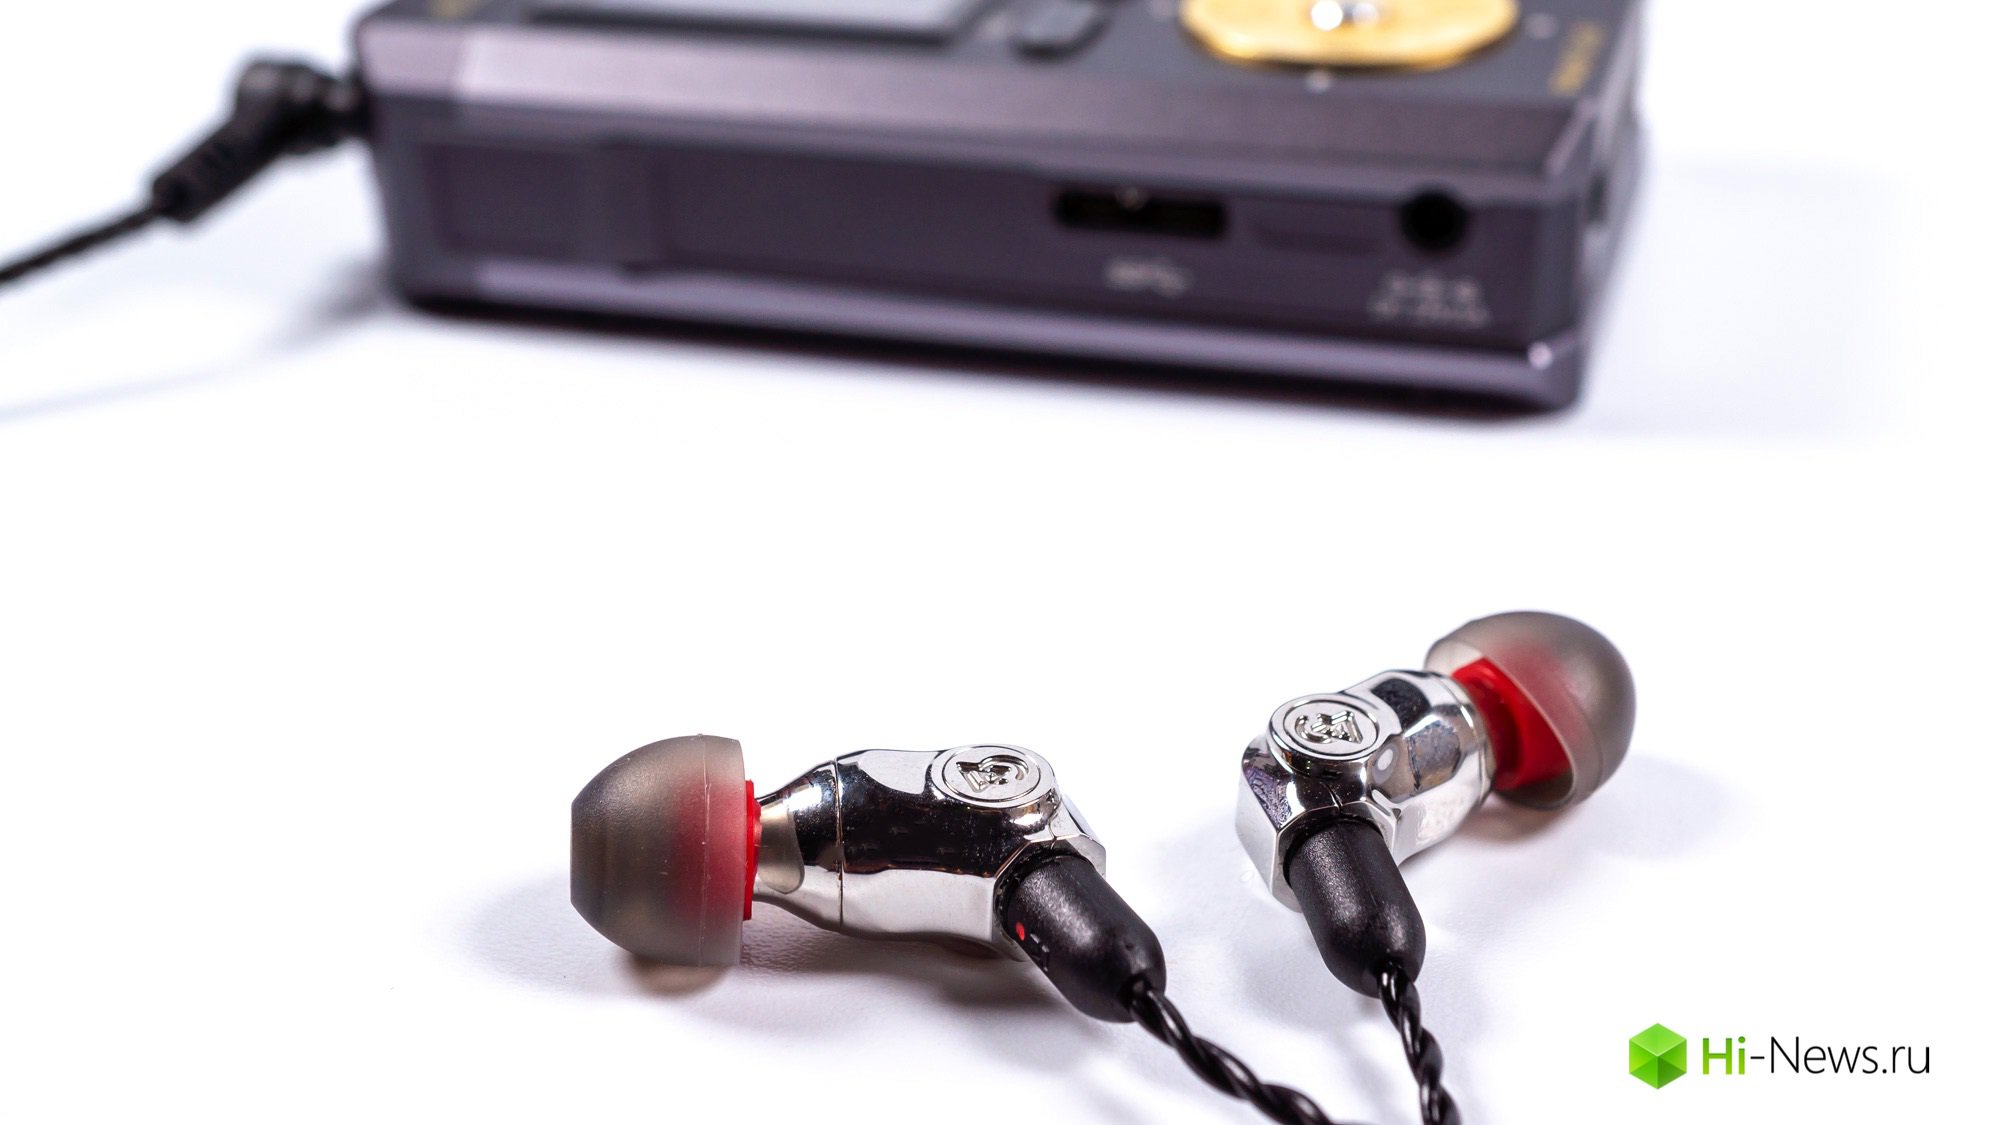 Overview headphone Audio Campfire Comet — there is one way up...